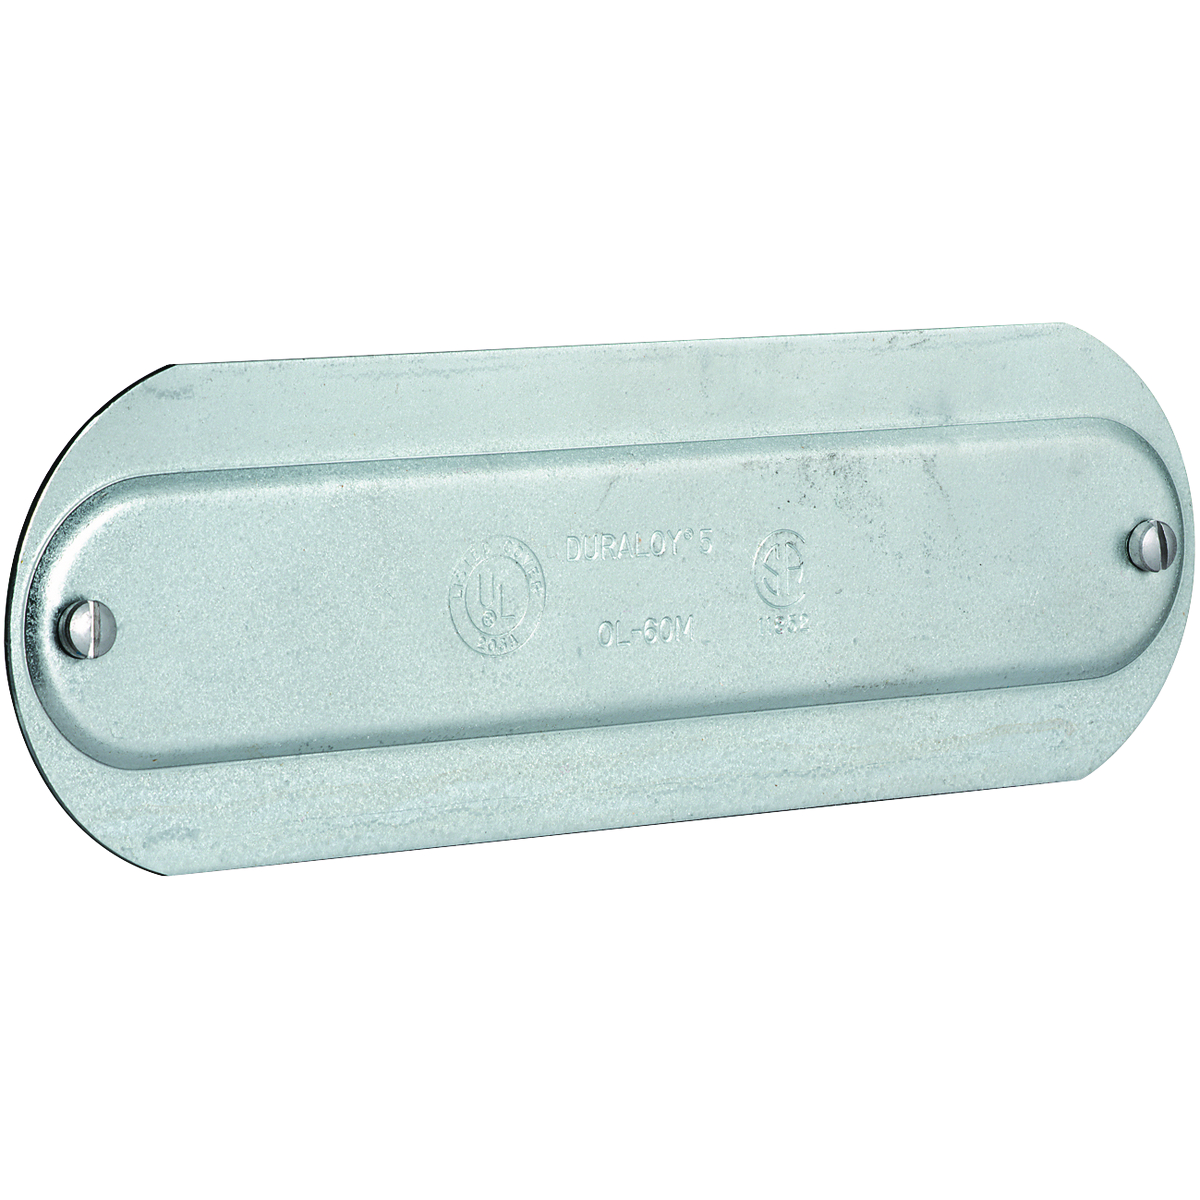 O SERIES/DURALOY 5 SERIES - STEEL STAMPED CONDUIT BODY COVER - HUB SIZE3/4 INCH